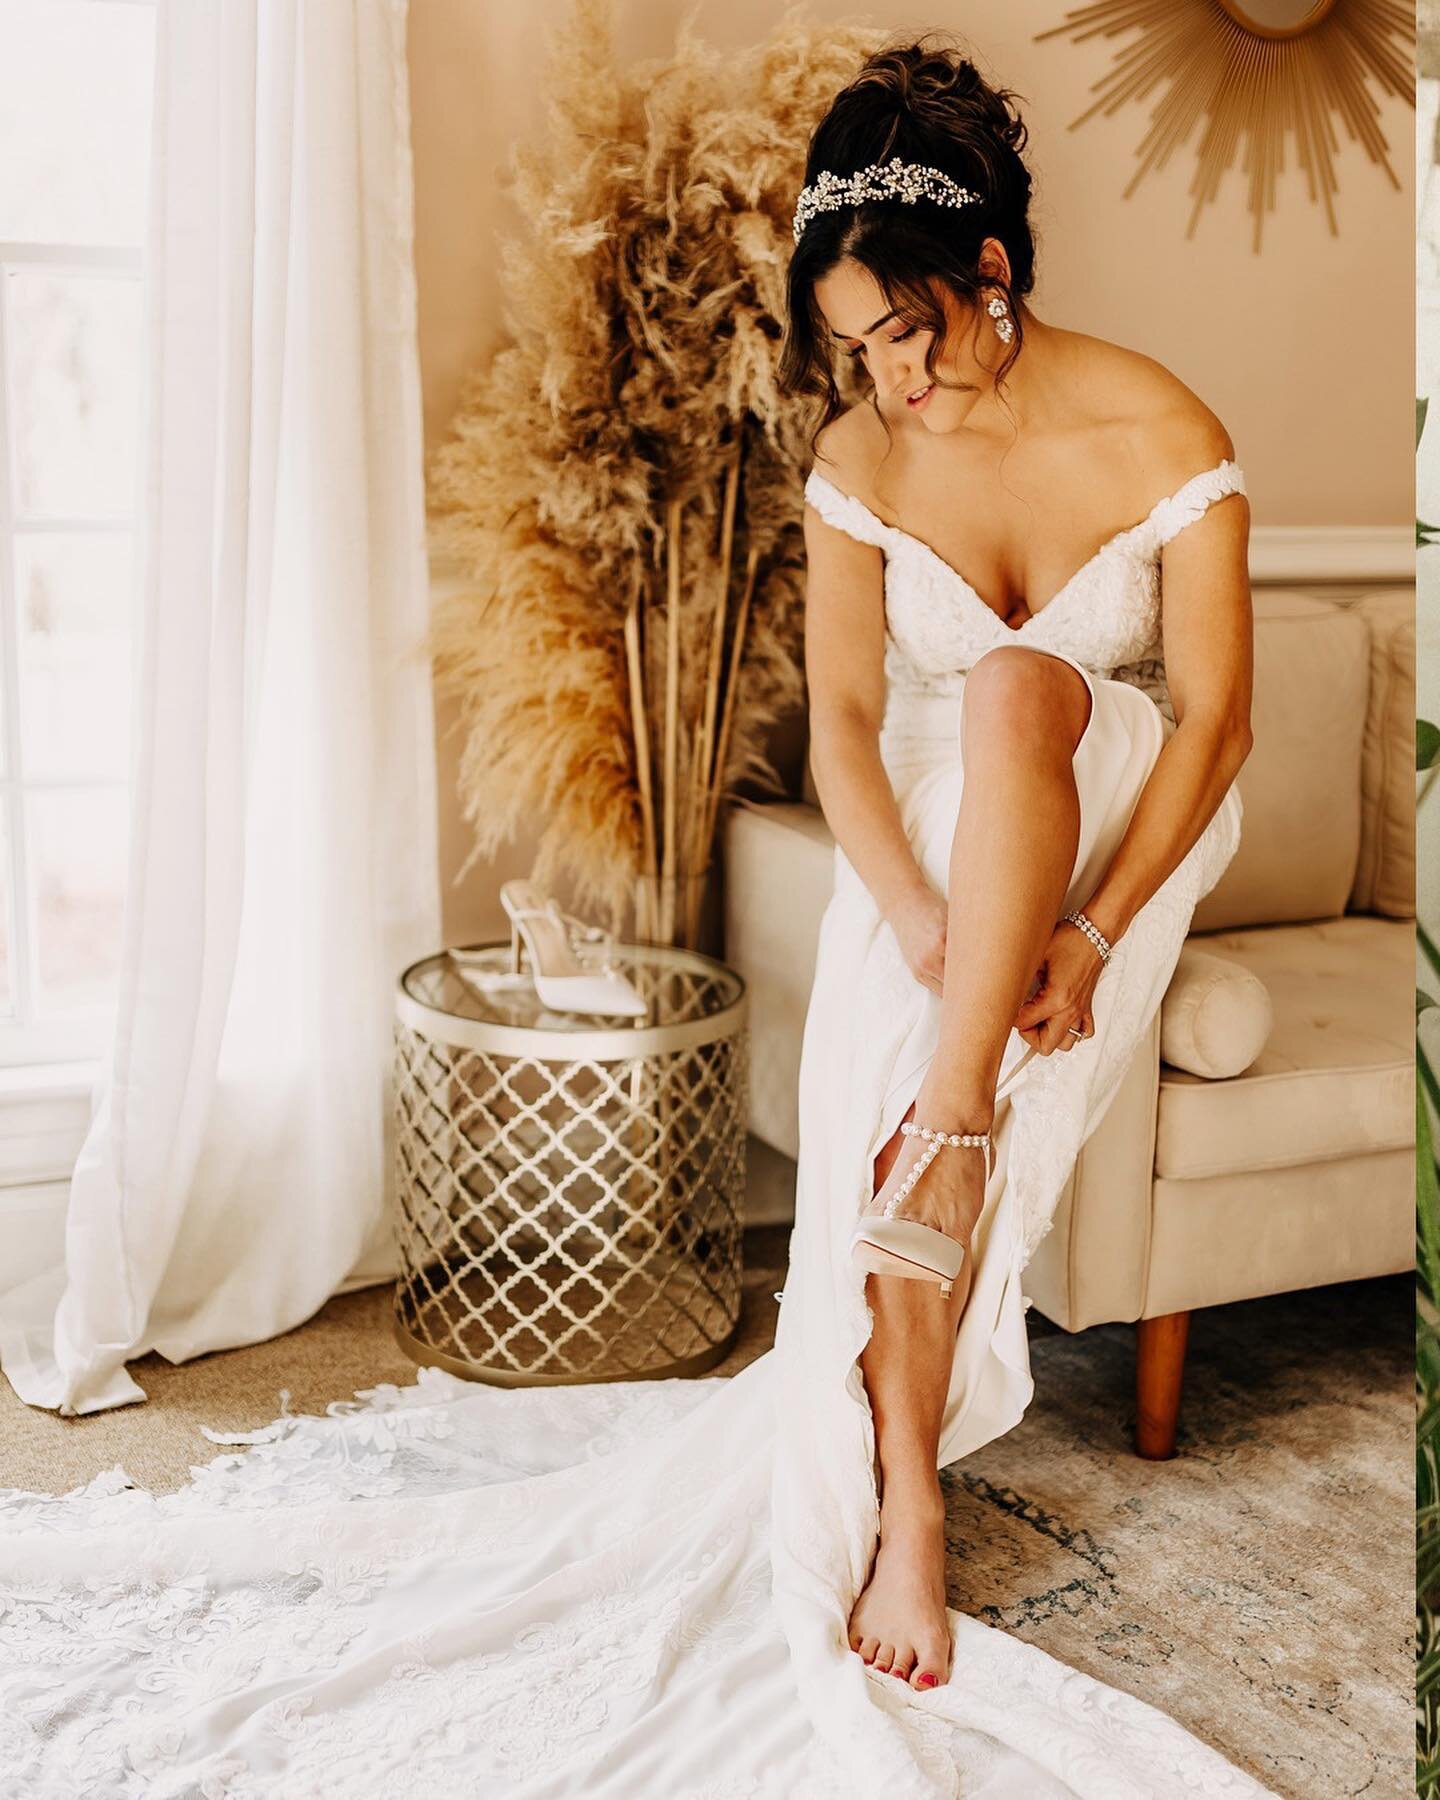 Choosing just a few photos to tell the story of a whole entire magical day is torture to me. Dramatic? 😆 y&rsquo;all..decisions are hard ok?!
Alas, here are a few shots from Nadia &amp; Joey&rsquo;s incredible Italian + Egyptian wedding at @melroser